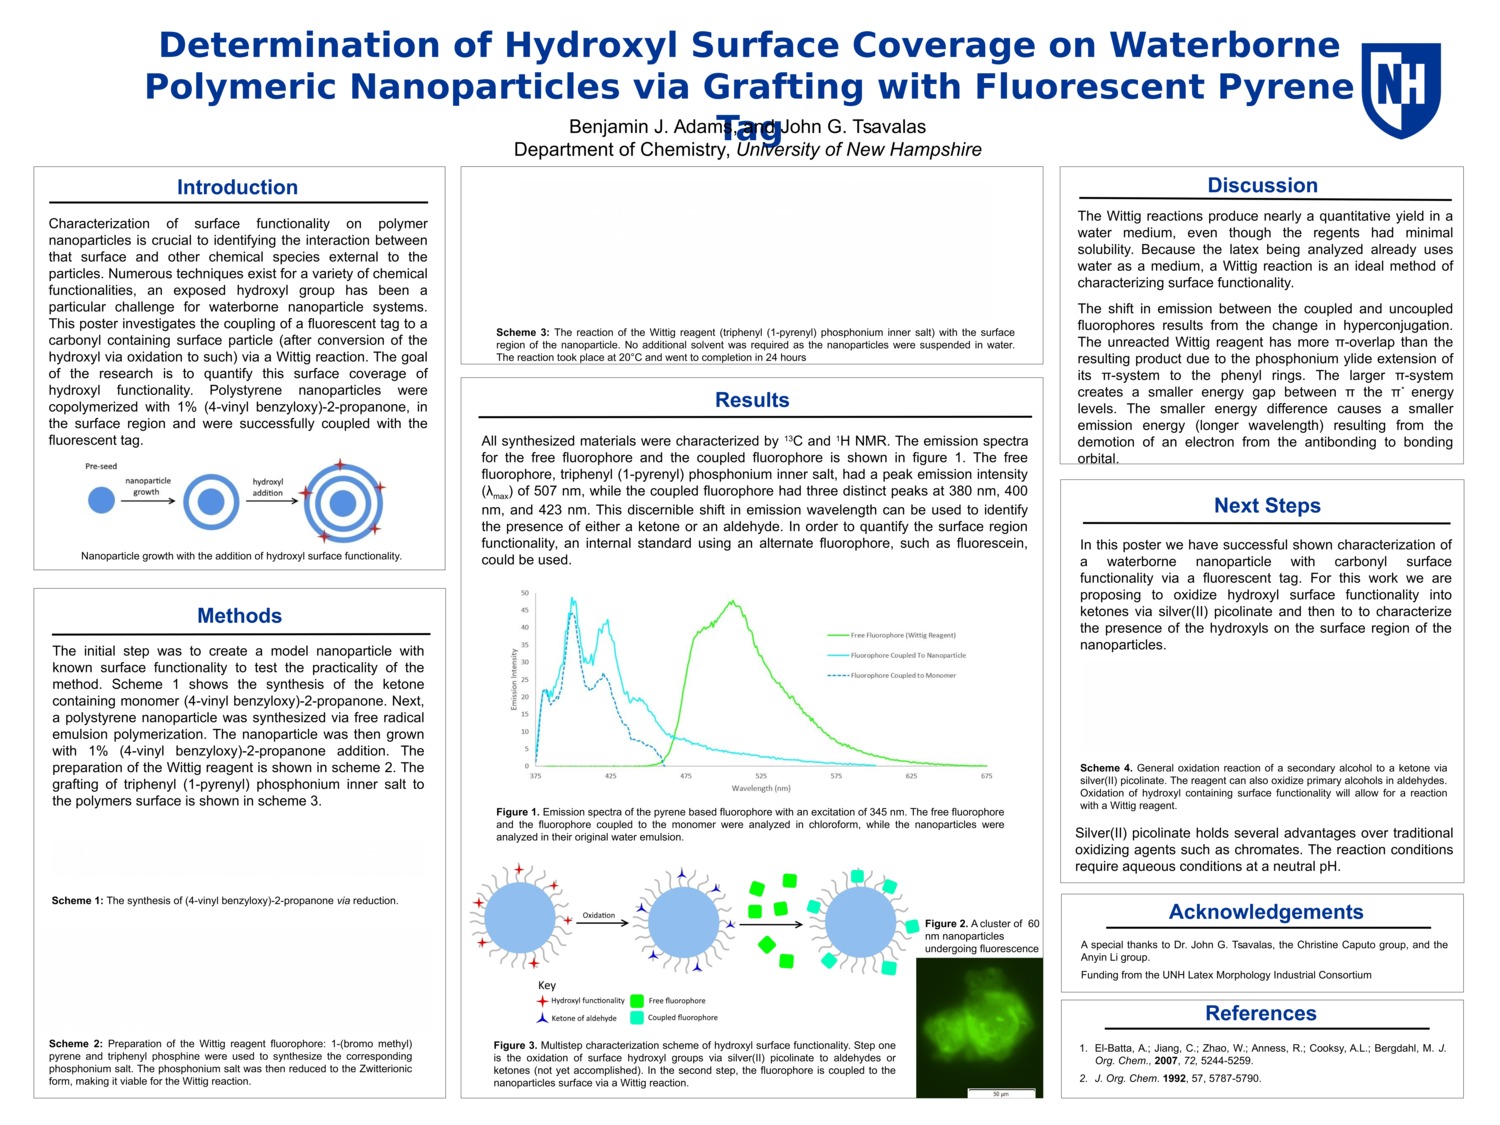 Determination Of Hydroxyl Surface Coverage On Waterborne Polymeric Nanoparticles Via Grafting With Fluorescent Pyrene Tag by bja1006